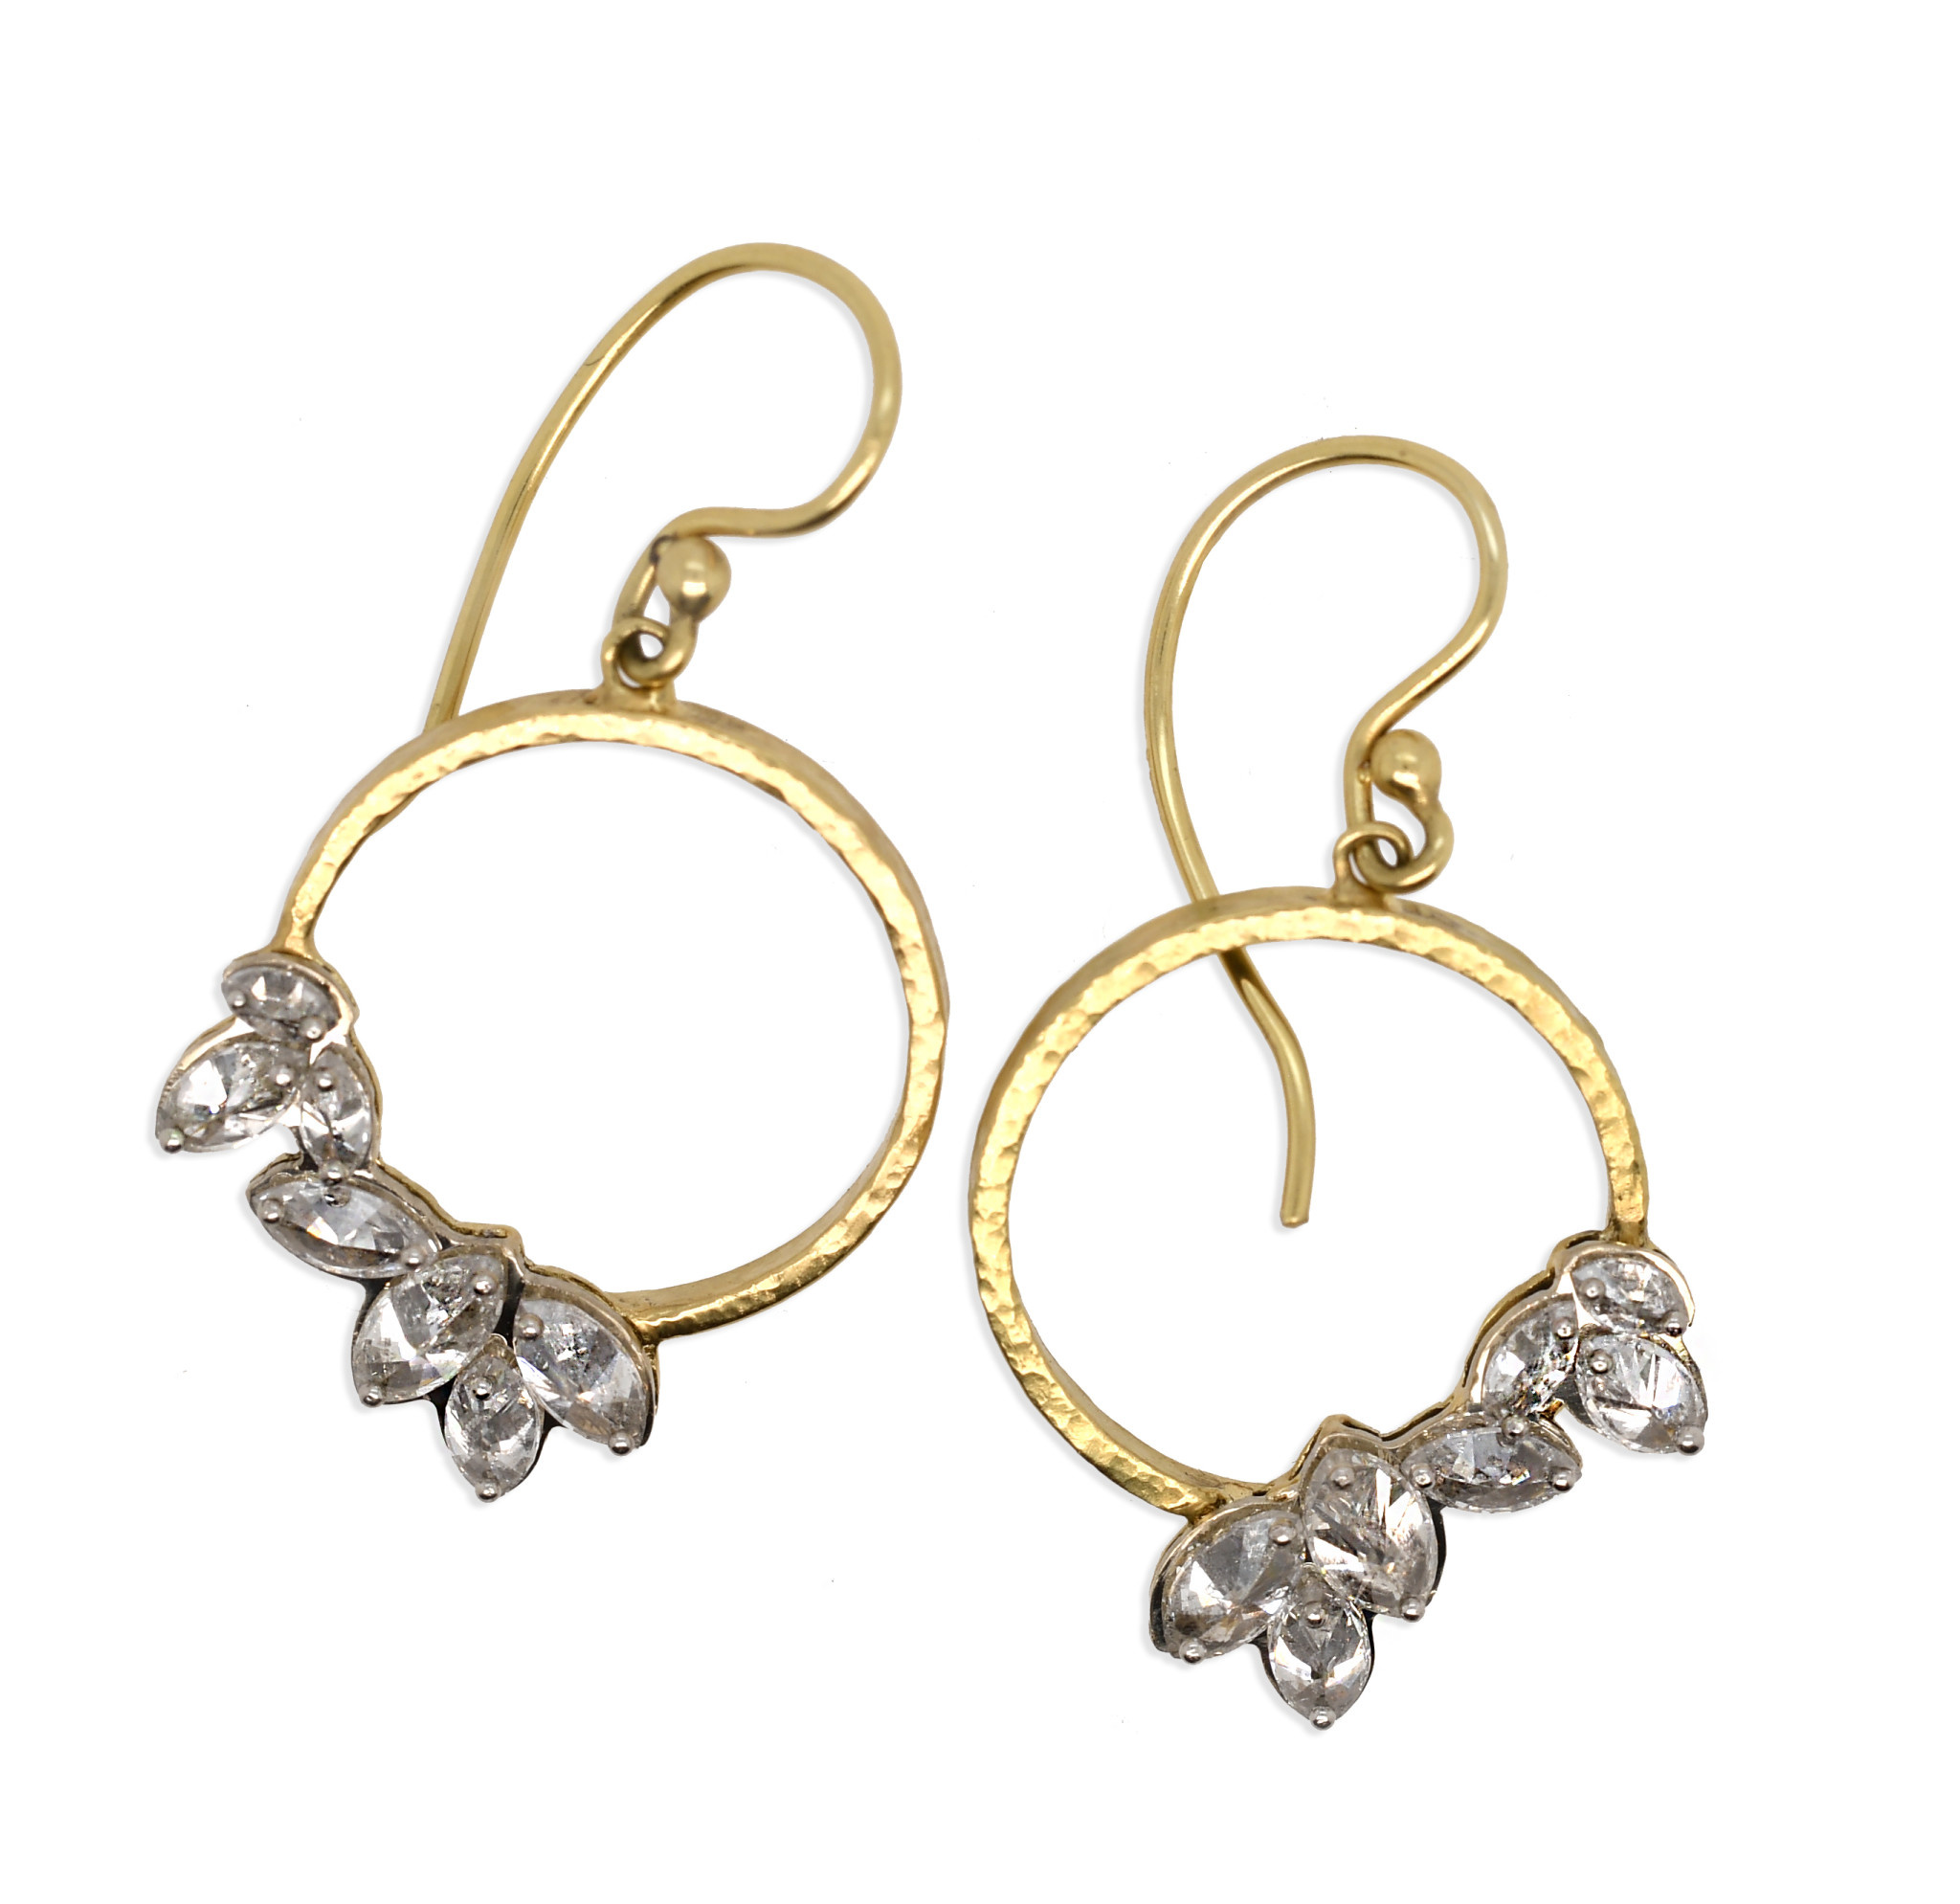 Jeweriche Imitation Gold Color Fancy Round Design Gola Stone Earrings